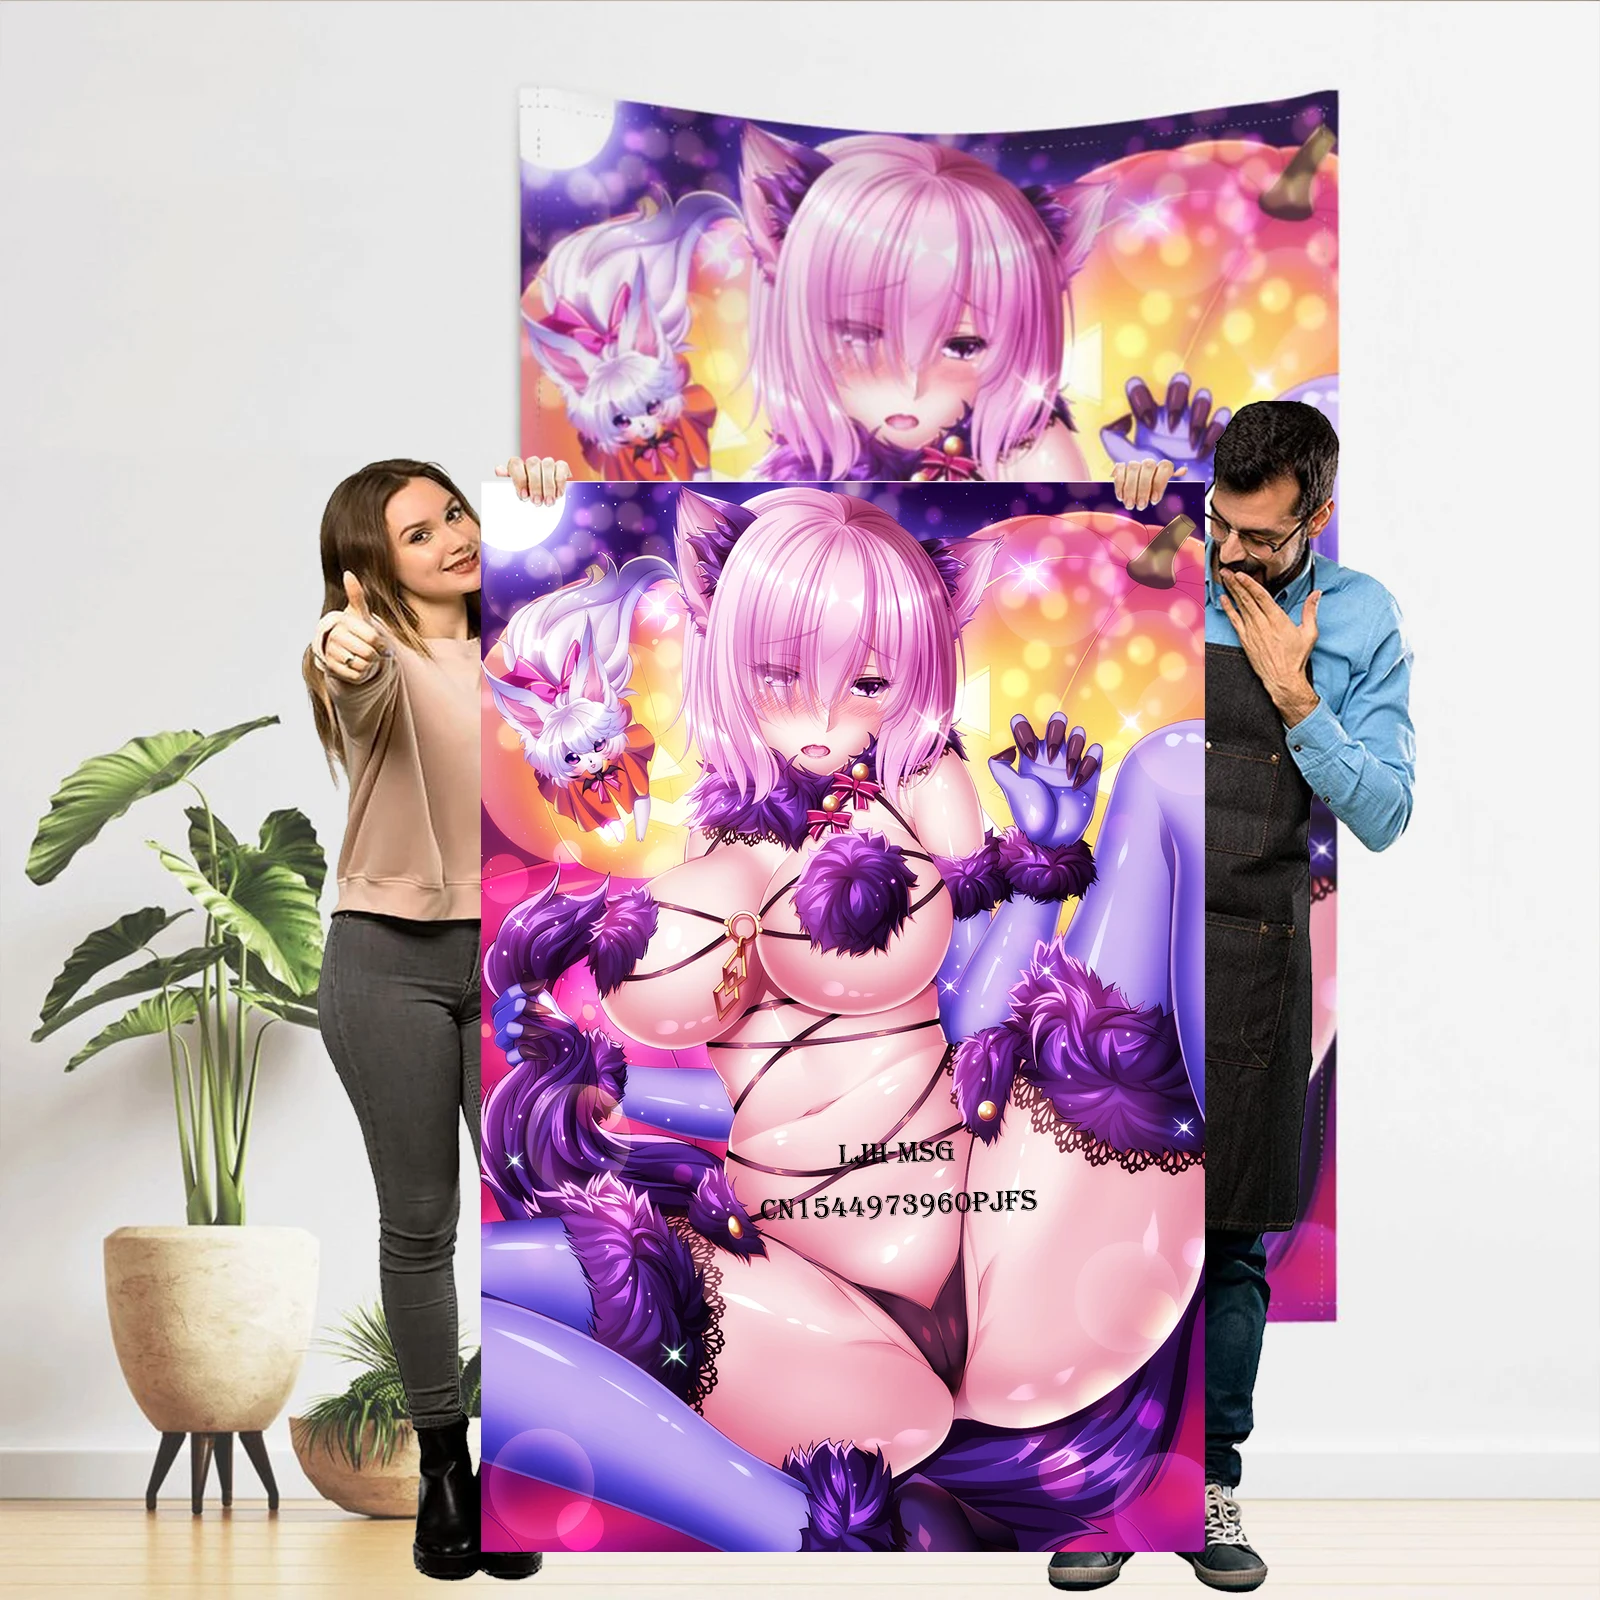 

Fate Grand Order Tapestry Anime Stuff FGO Painting Wall Decor Sexy Doujin Tapestry for Bedroom Hentai Poster Wall Tapestry Merch